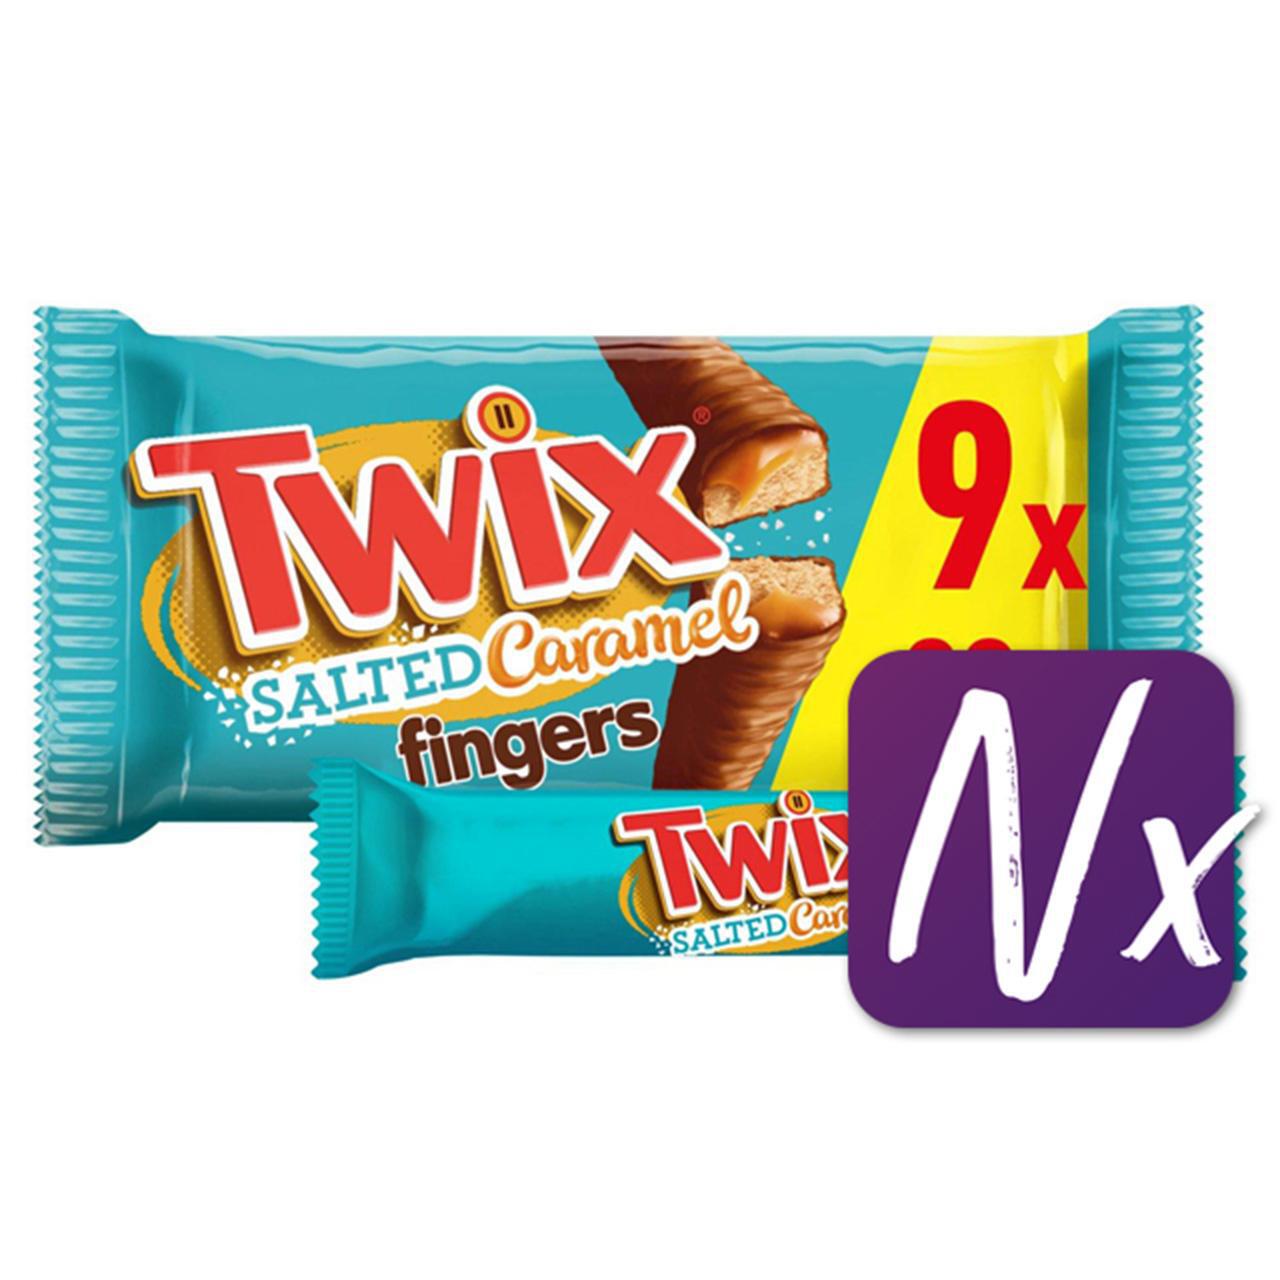 Twix Salted Caramel & Milk Chocolate Fingers Biscuit Snack Bars Multipack 9 x 20g